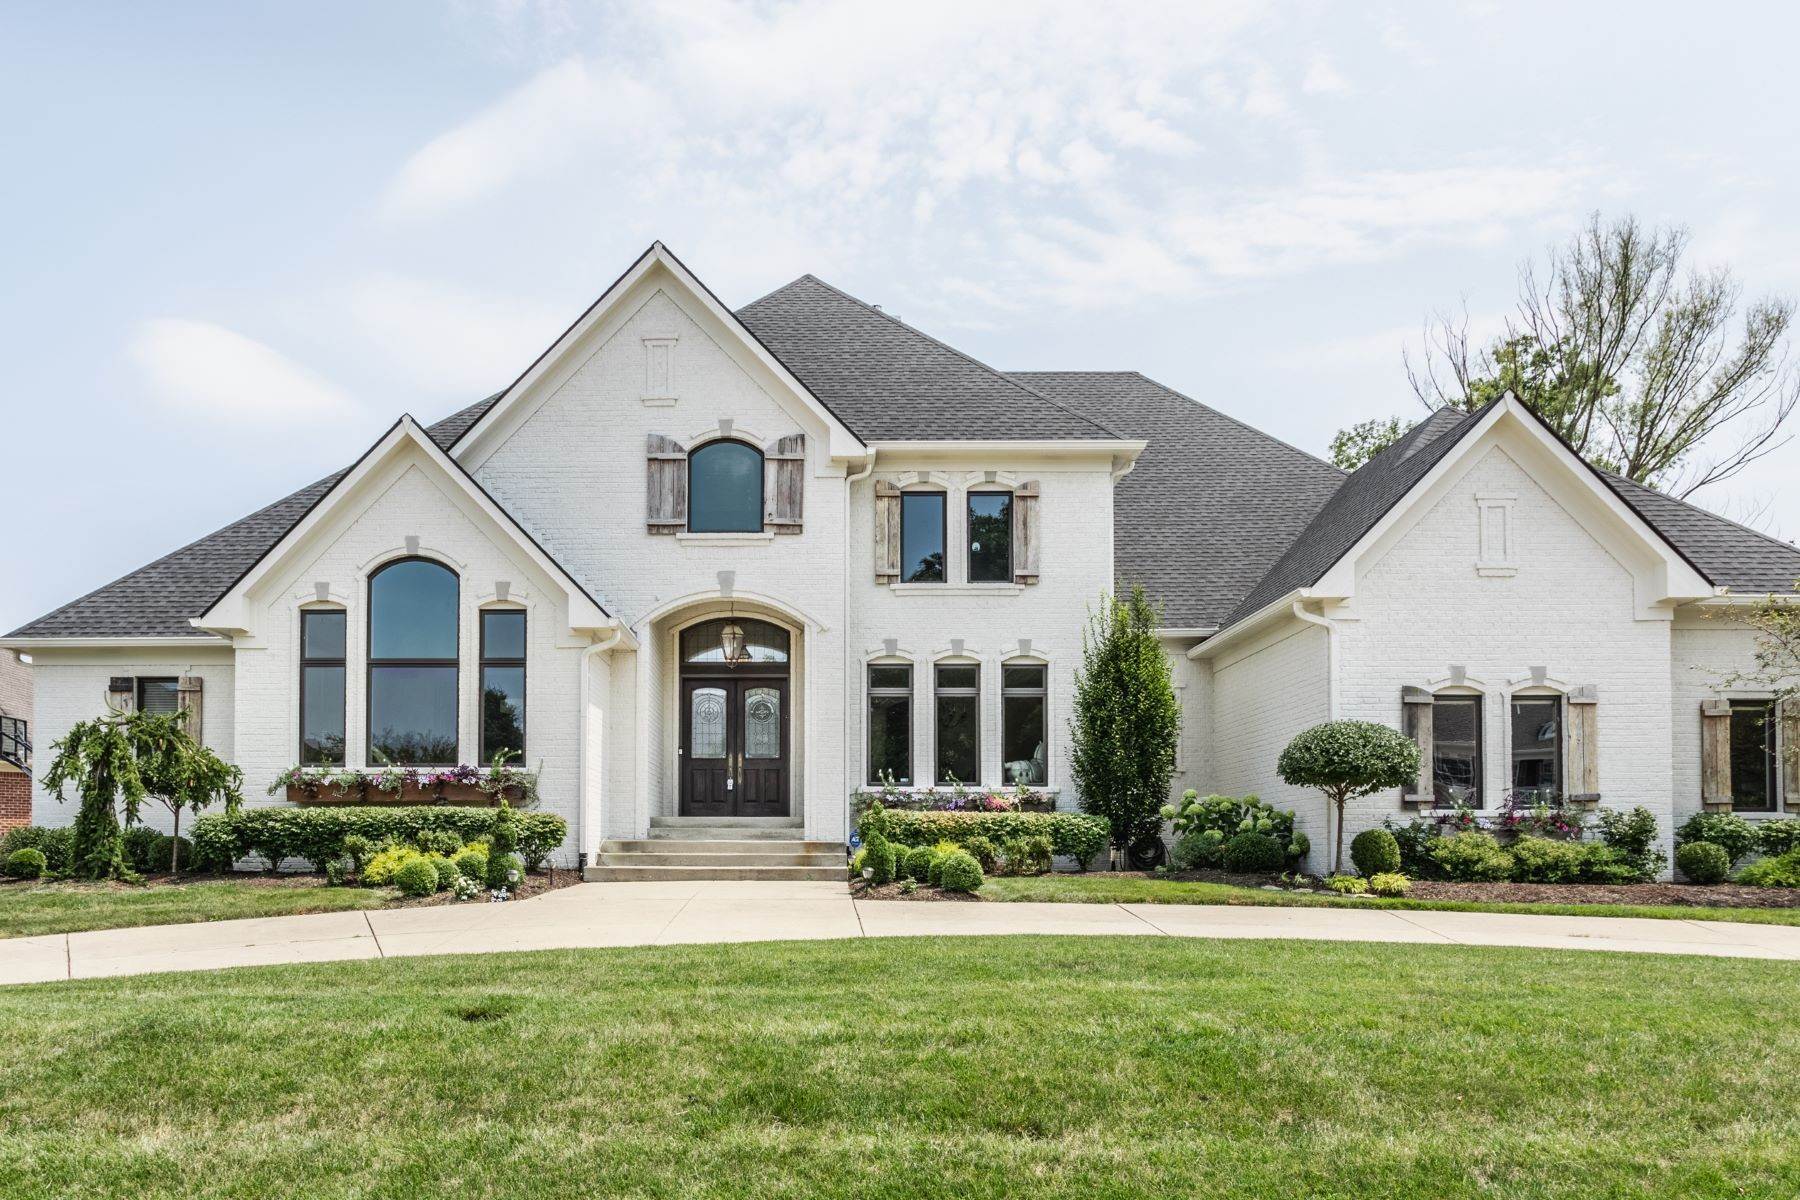 Single Family Homes for Sale at Luxury Home in Gated Windemere 10415 Charter Oaks Drive Carmel, Indiana 46032 United States